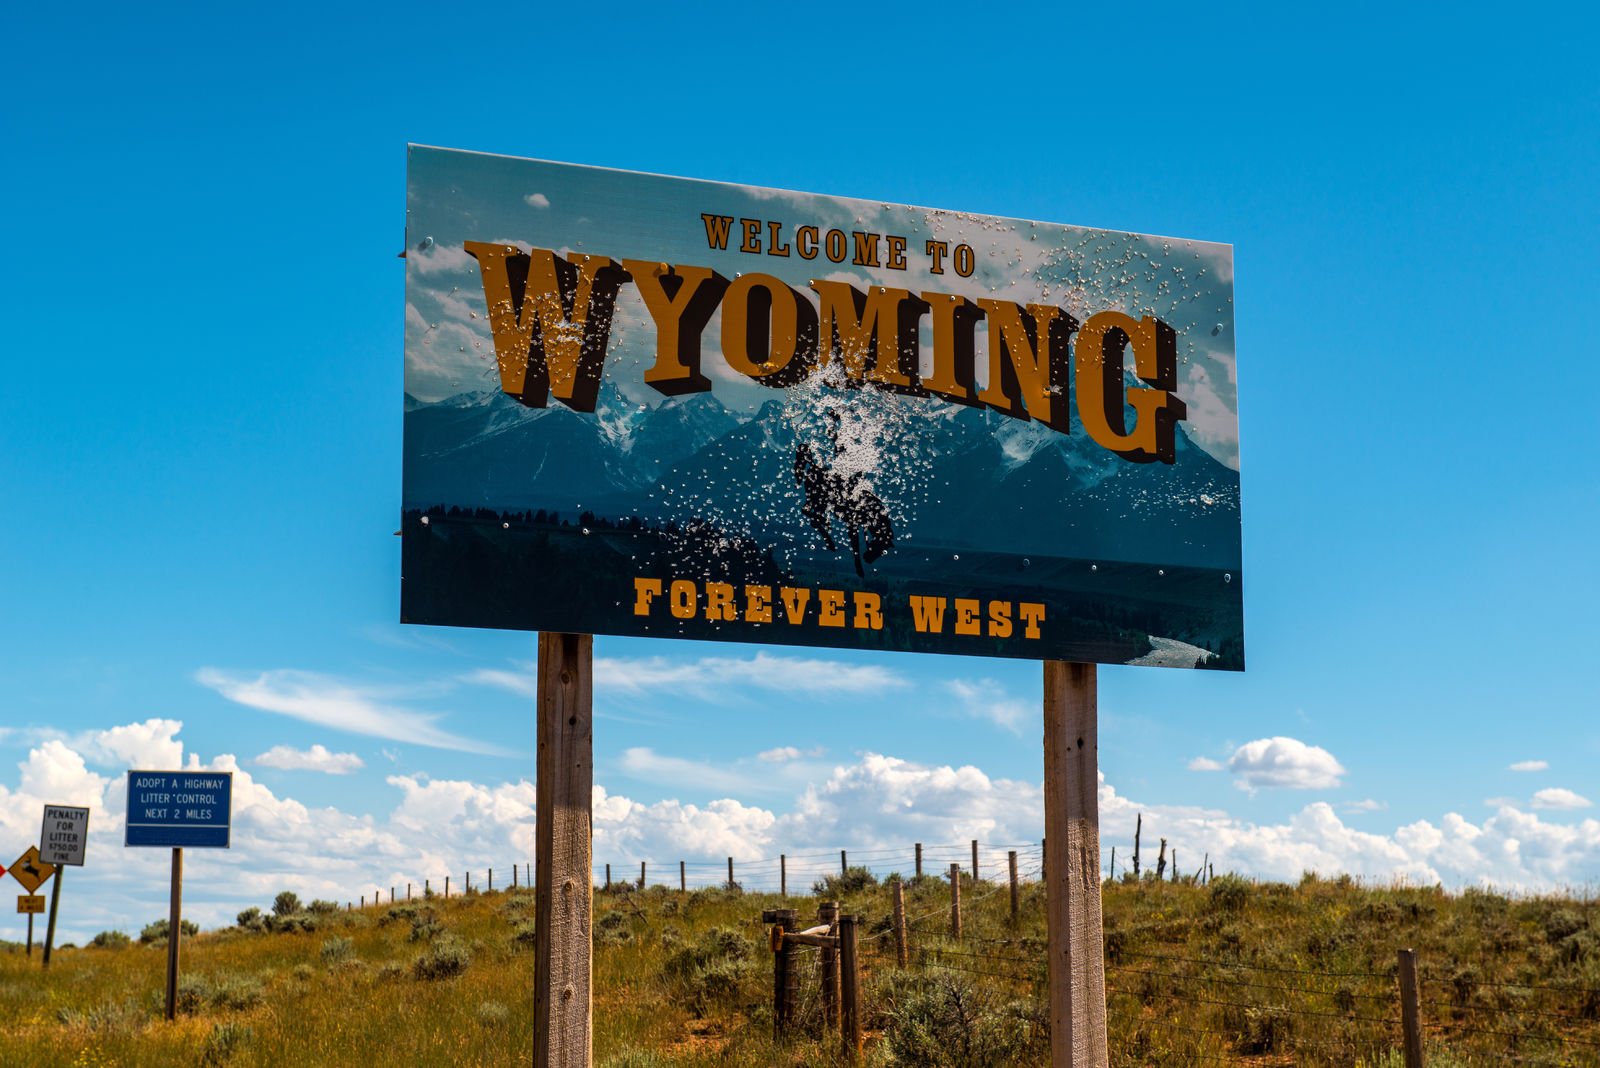 What are state minimums for auto insurance in Wyoming?